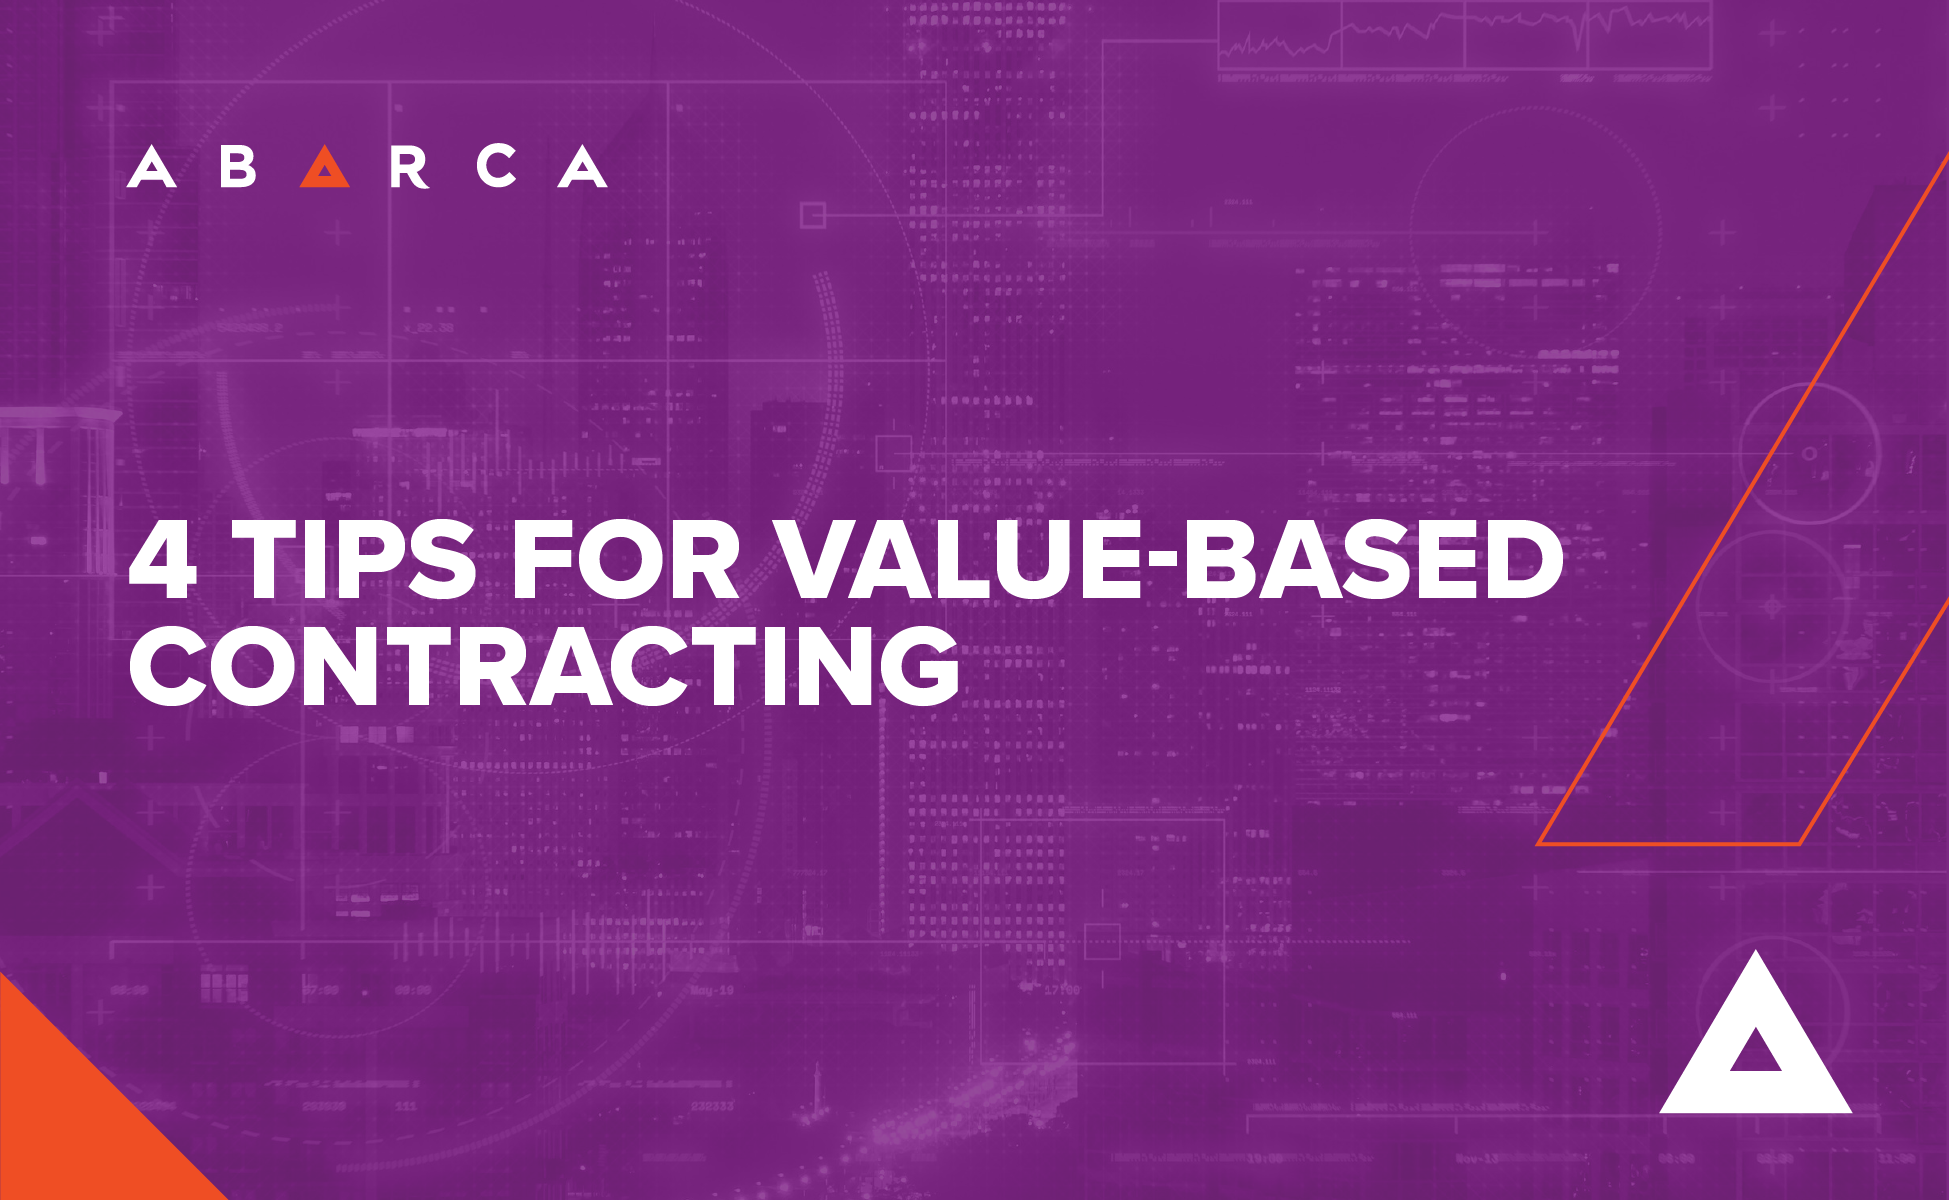 Abarca Health: 4 Tips for Value-Based Contracting